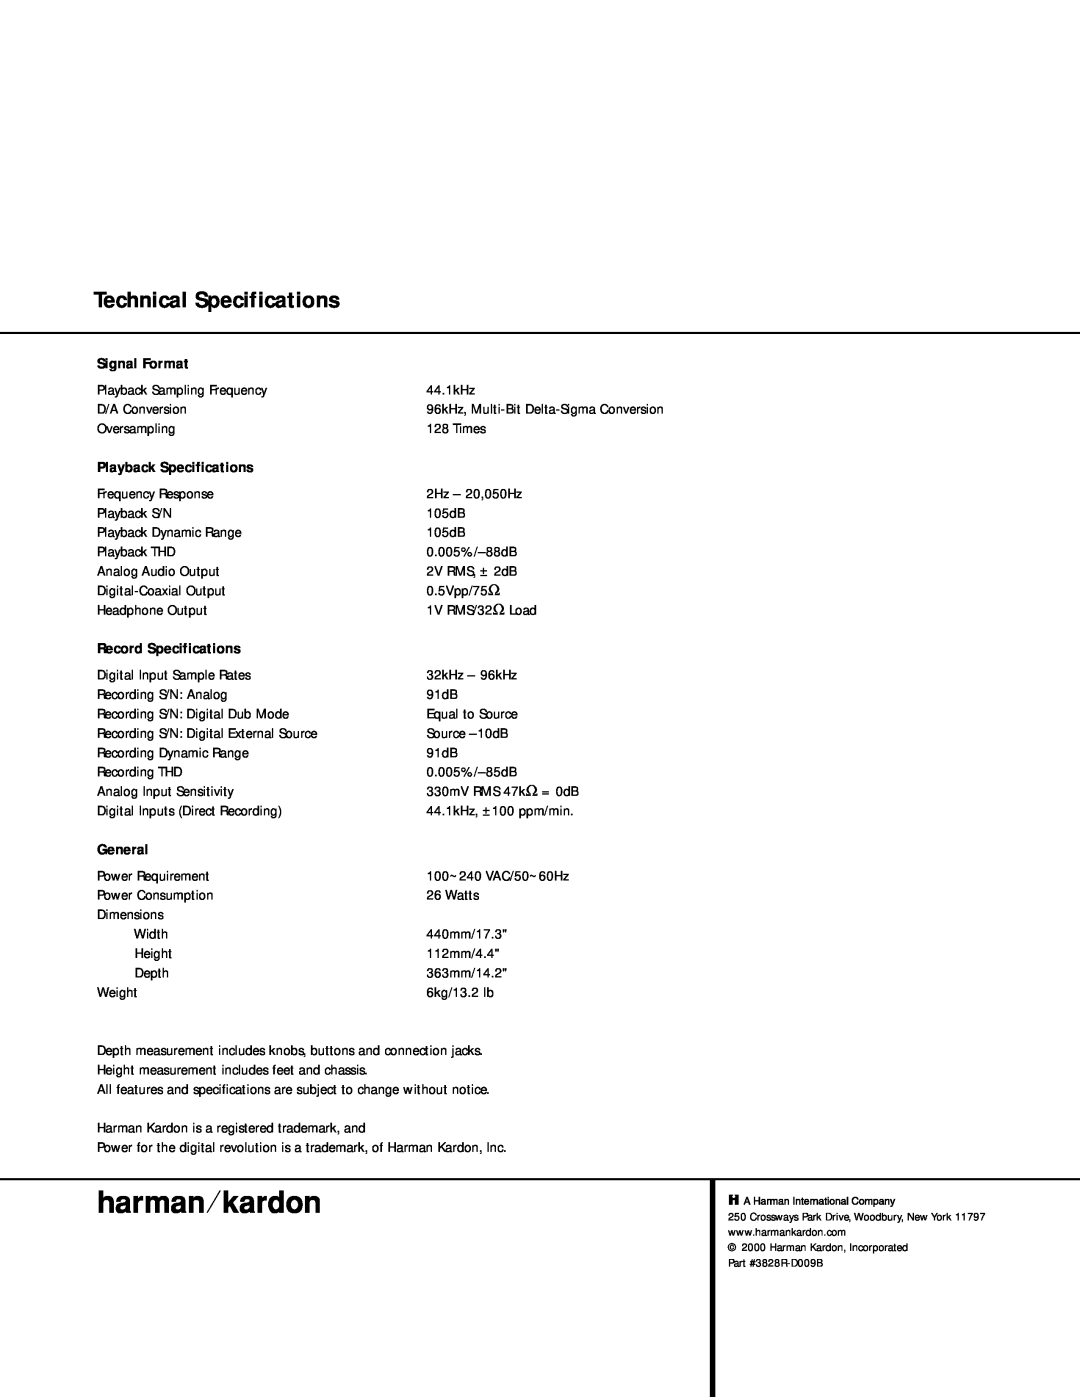 Harman-Kardon CDR 20 Technical Specifications, Signal Format, Playback Specifications, Record Specifications, General 